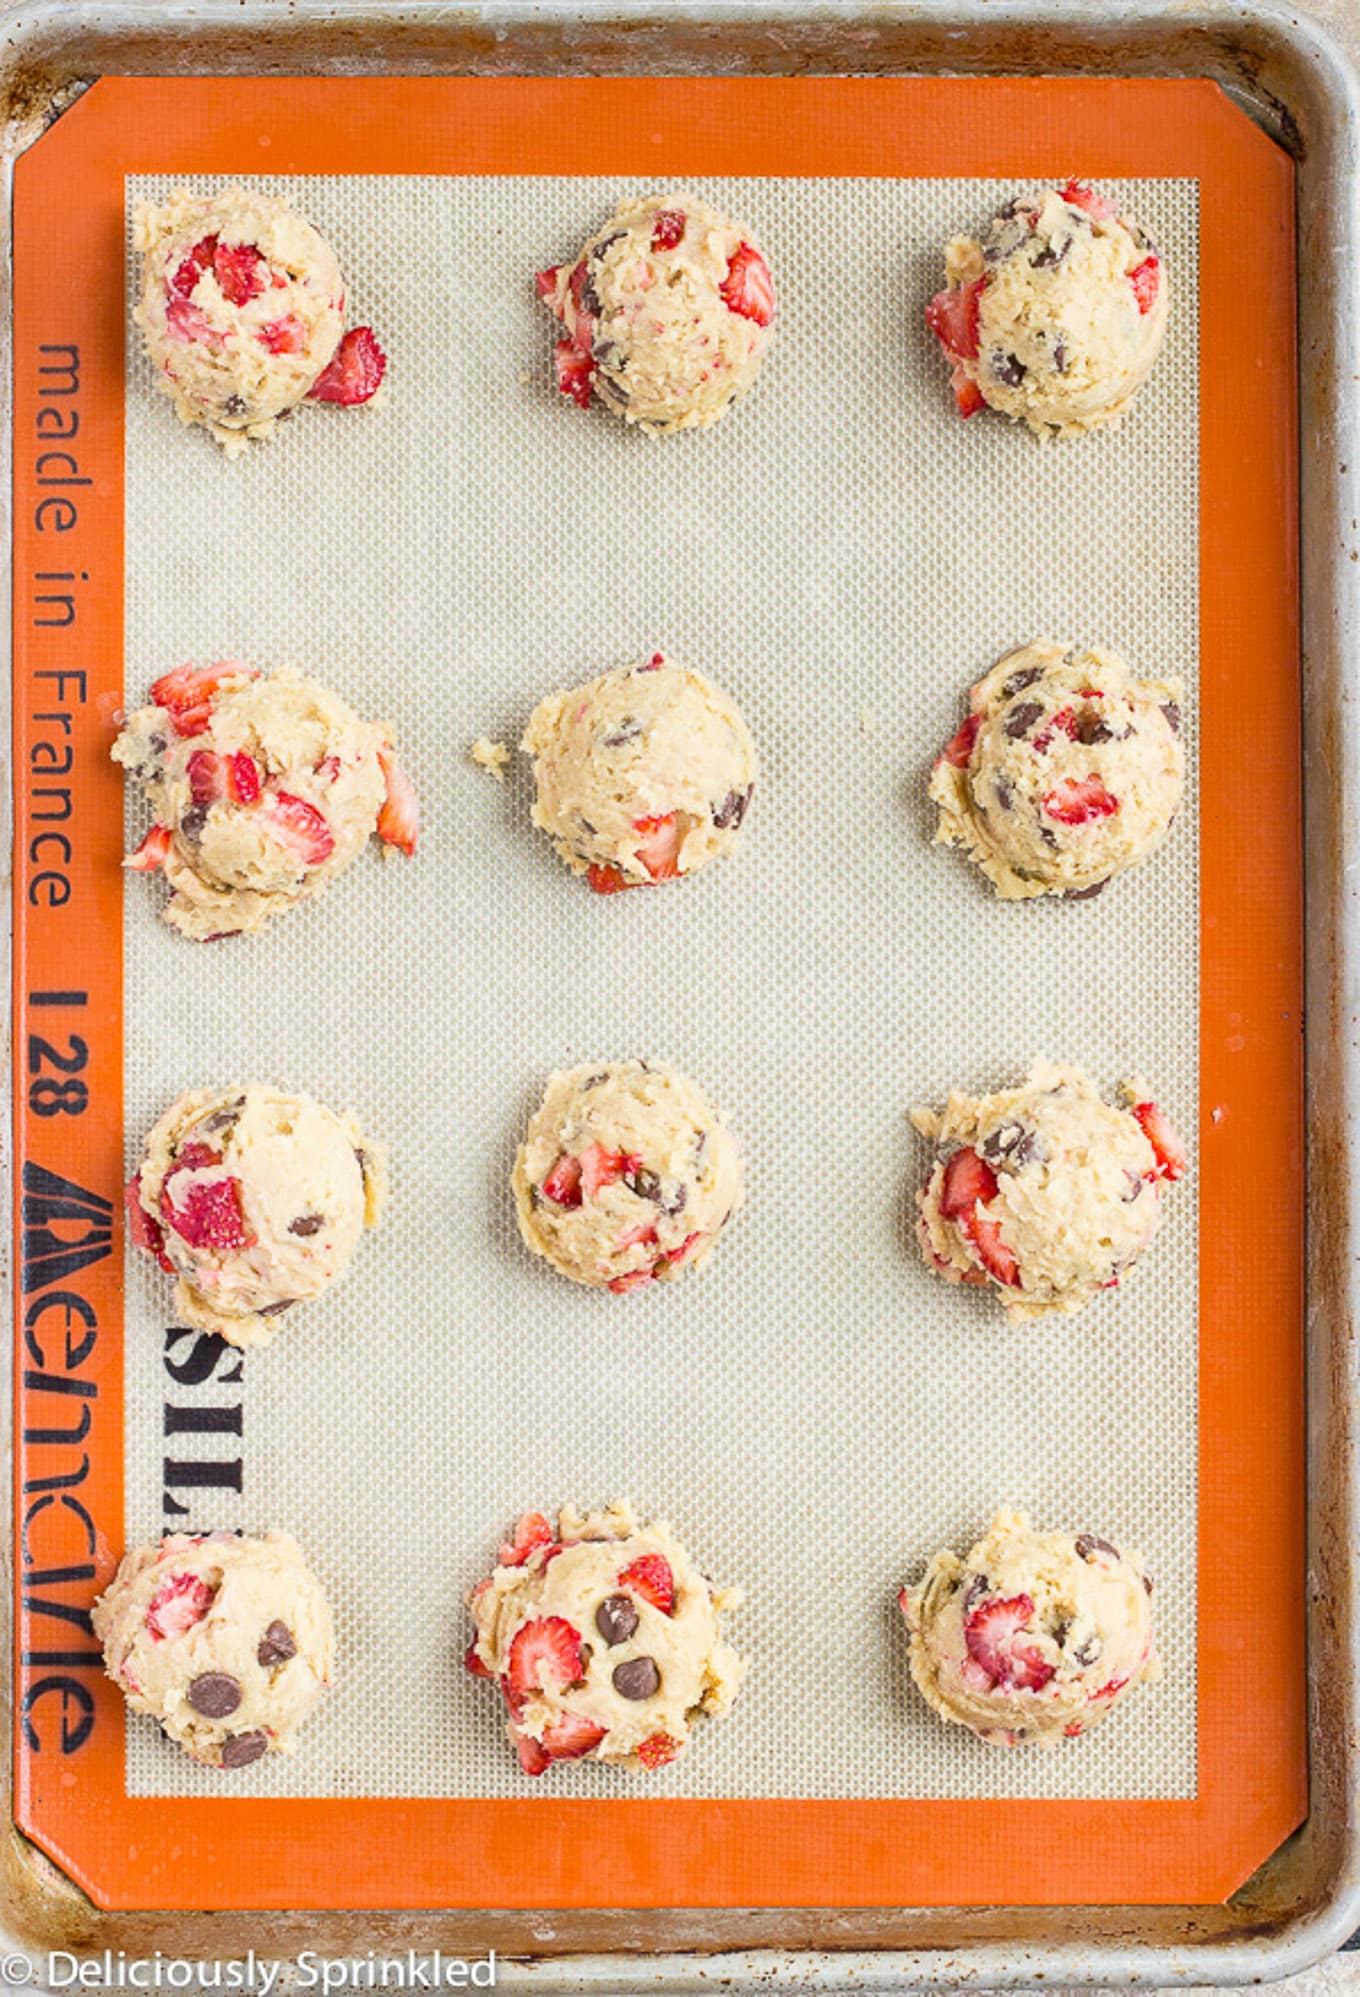 Strawberry cookie dough scooped onto a baking tray.